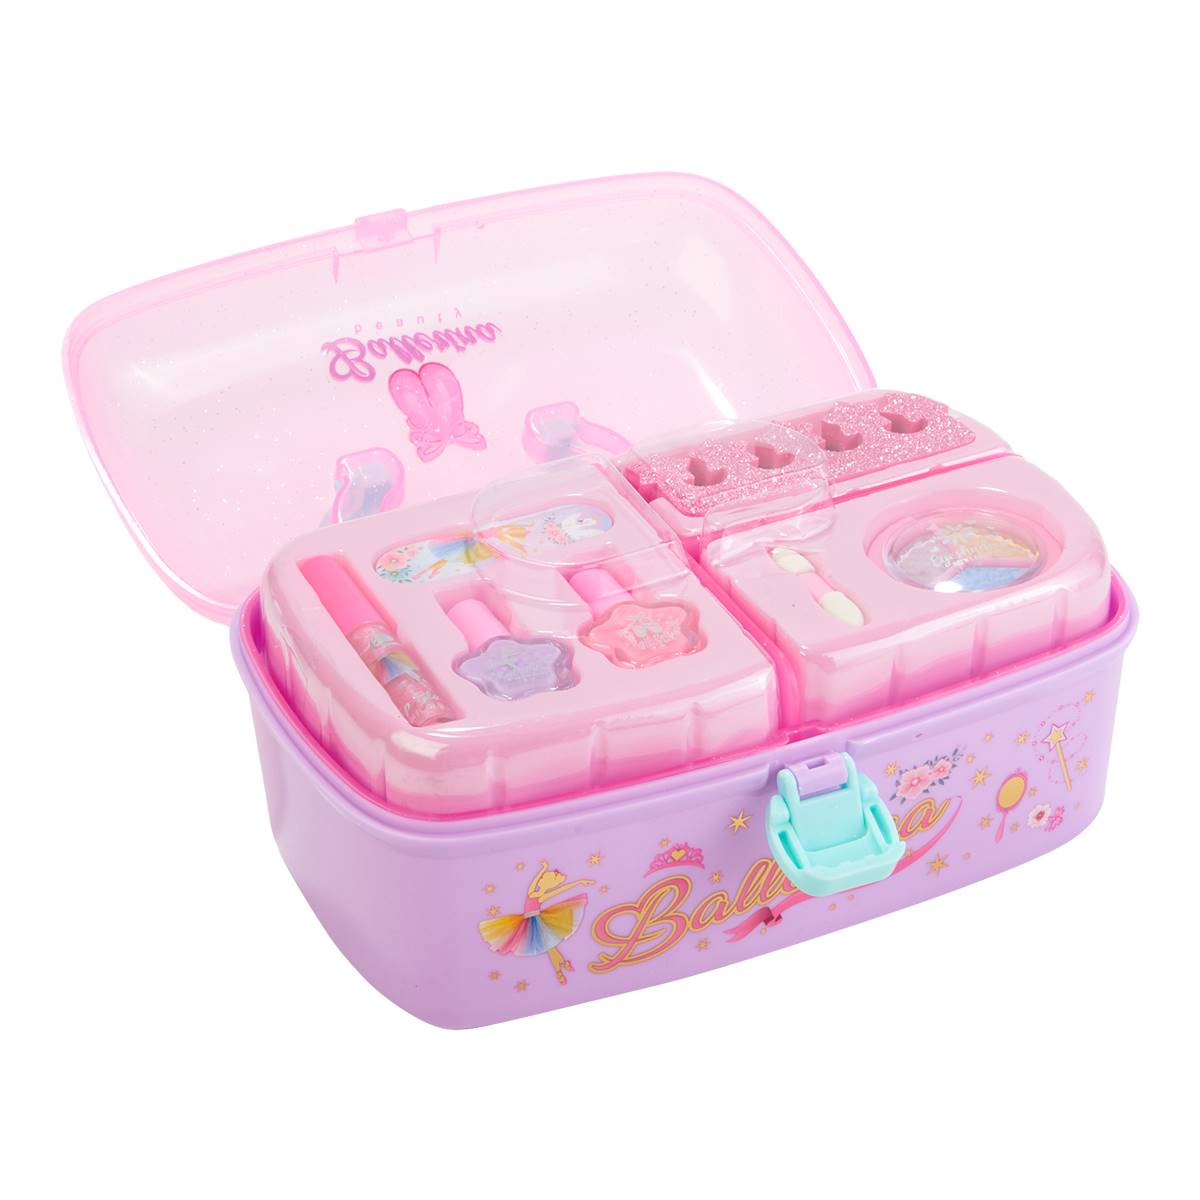 Girls Hot Focus(R) Ballerina Beauty Cosmetic Caboodle